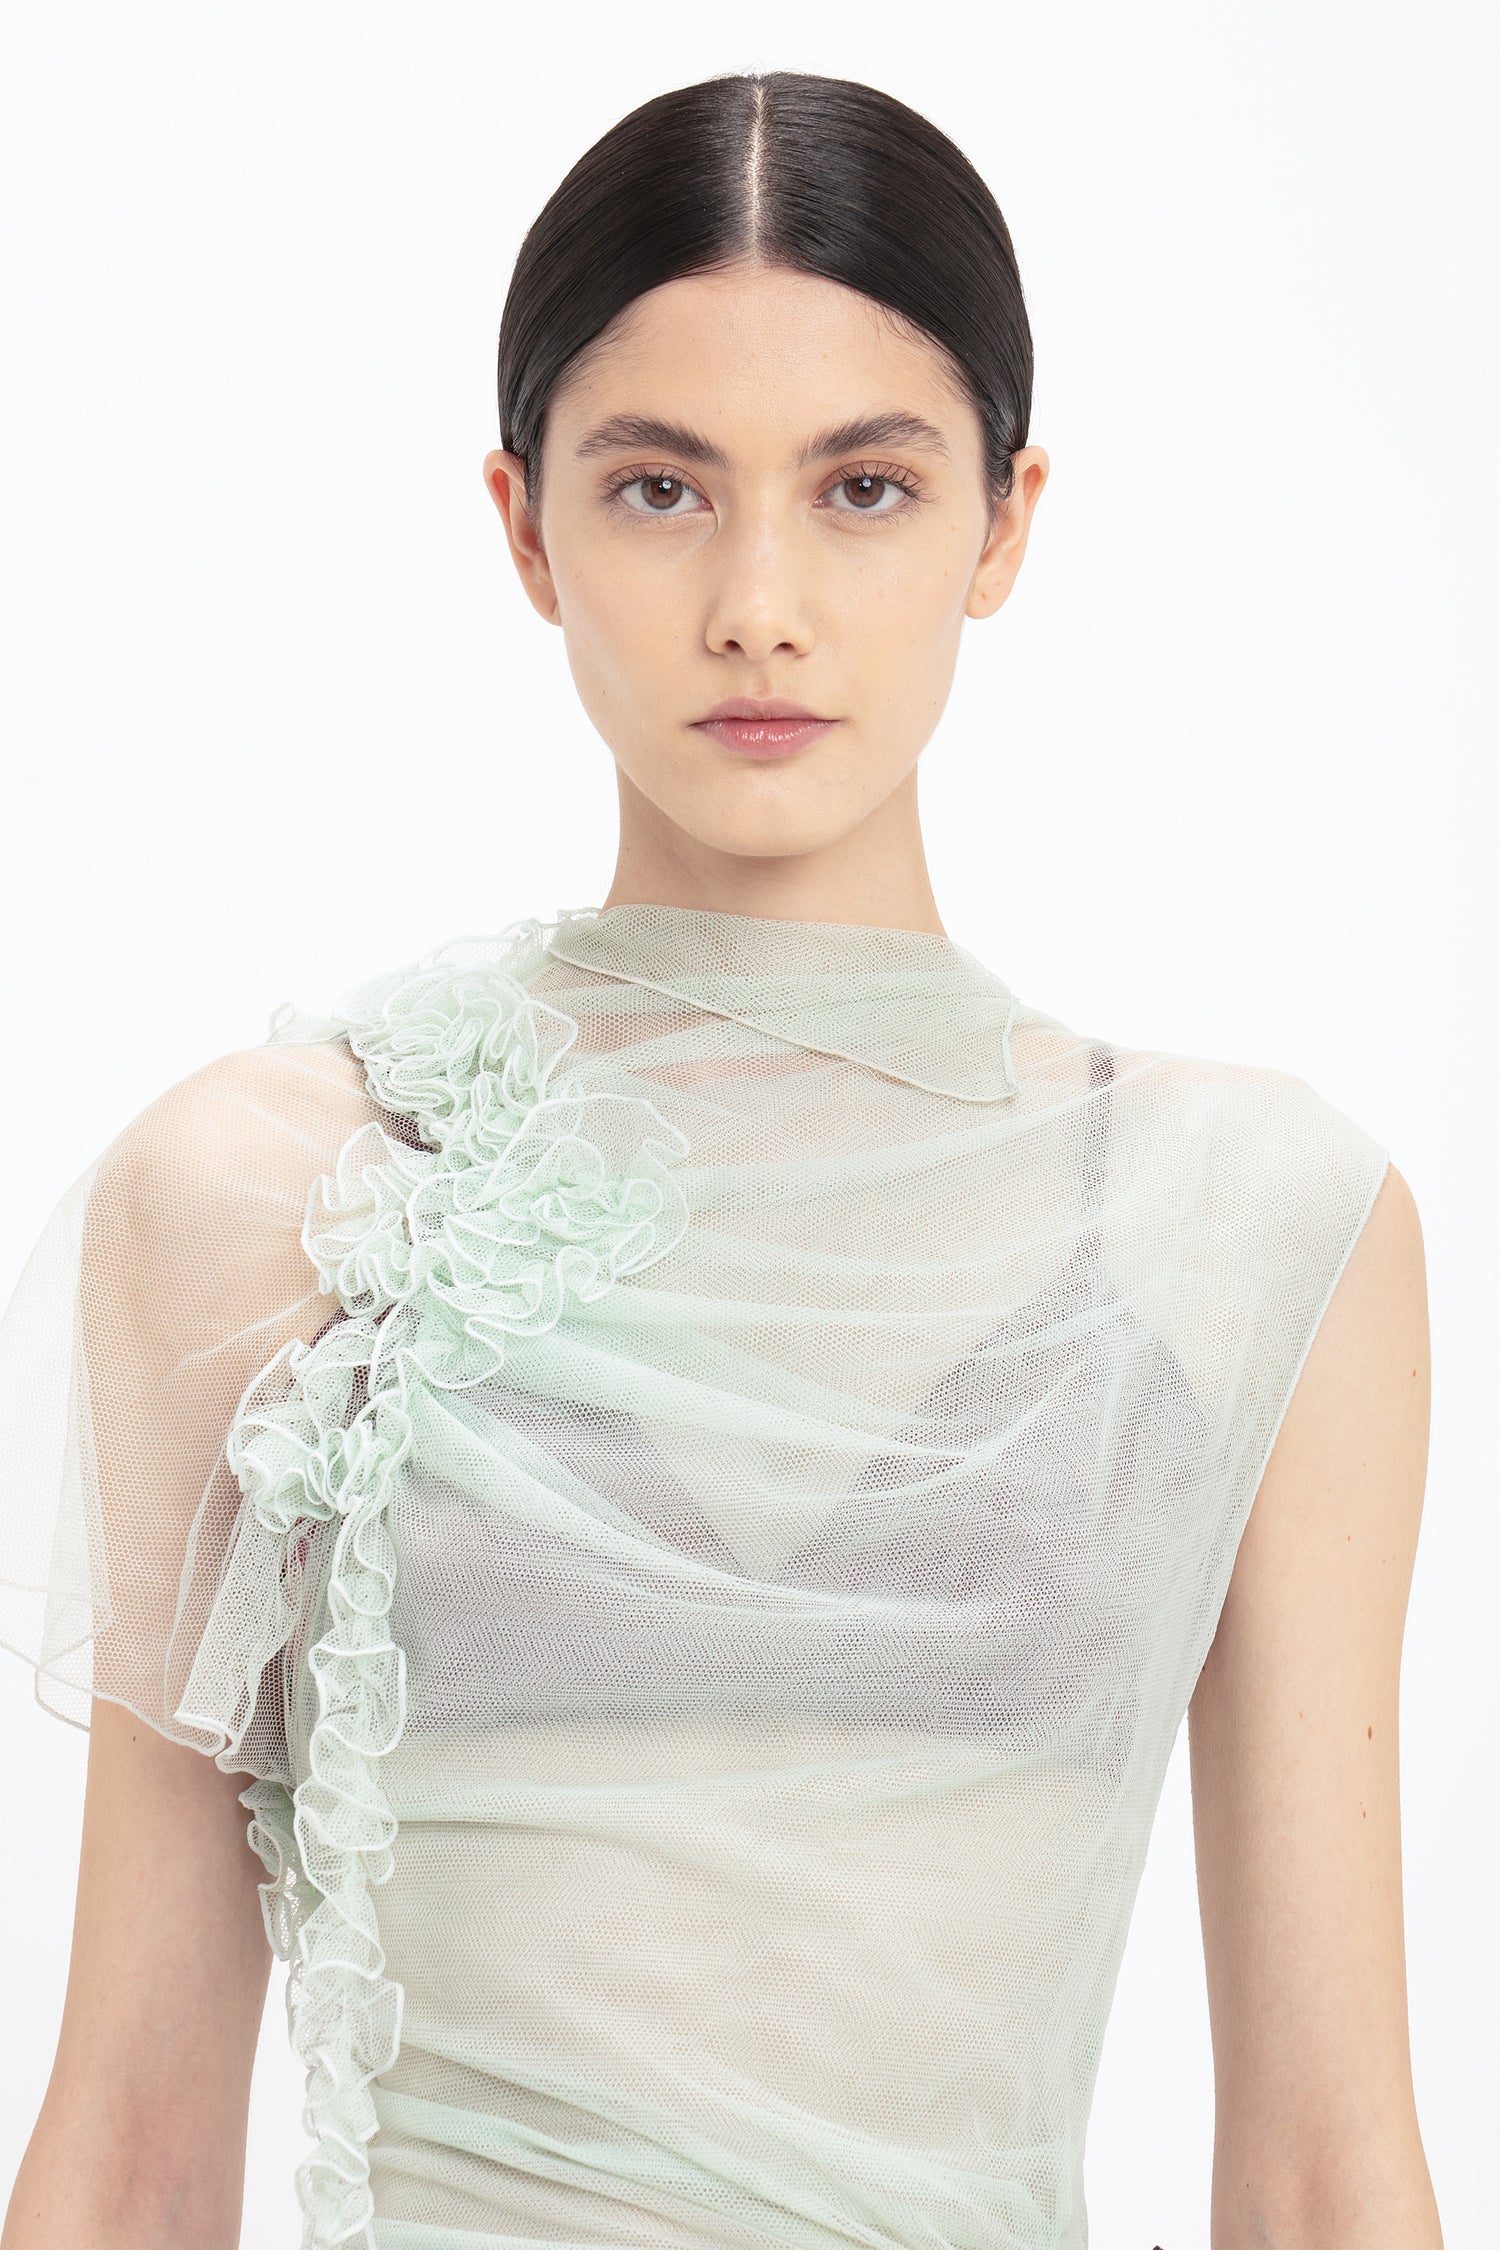 A woman with dark hair is wearing a Victoria Beckham Gathered Tulle Detail Floor-Length Dress In Jade. She is looking directly at the camera with a neutral expression against a plain background. For more stunning designs, visit VictoriaBeckham.com.